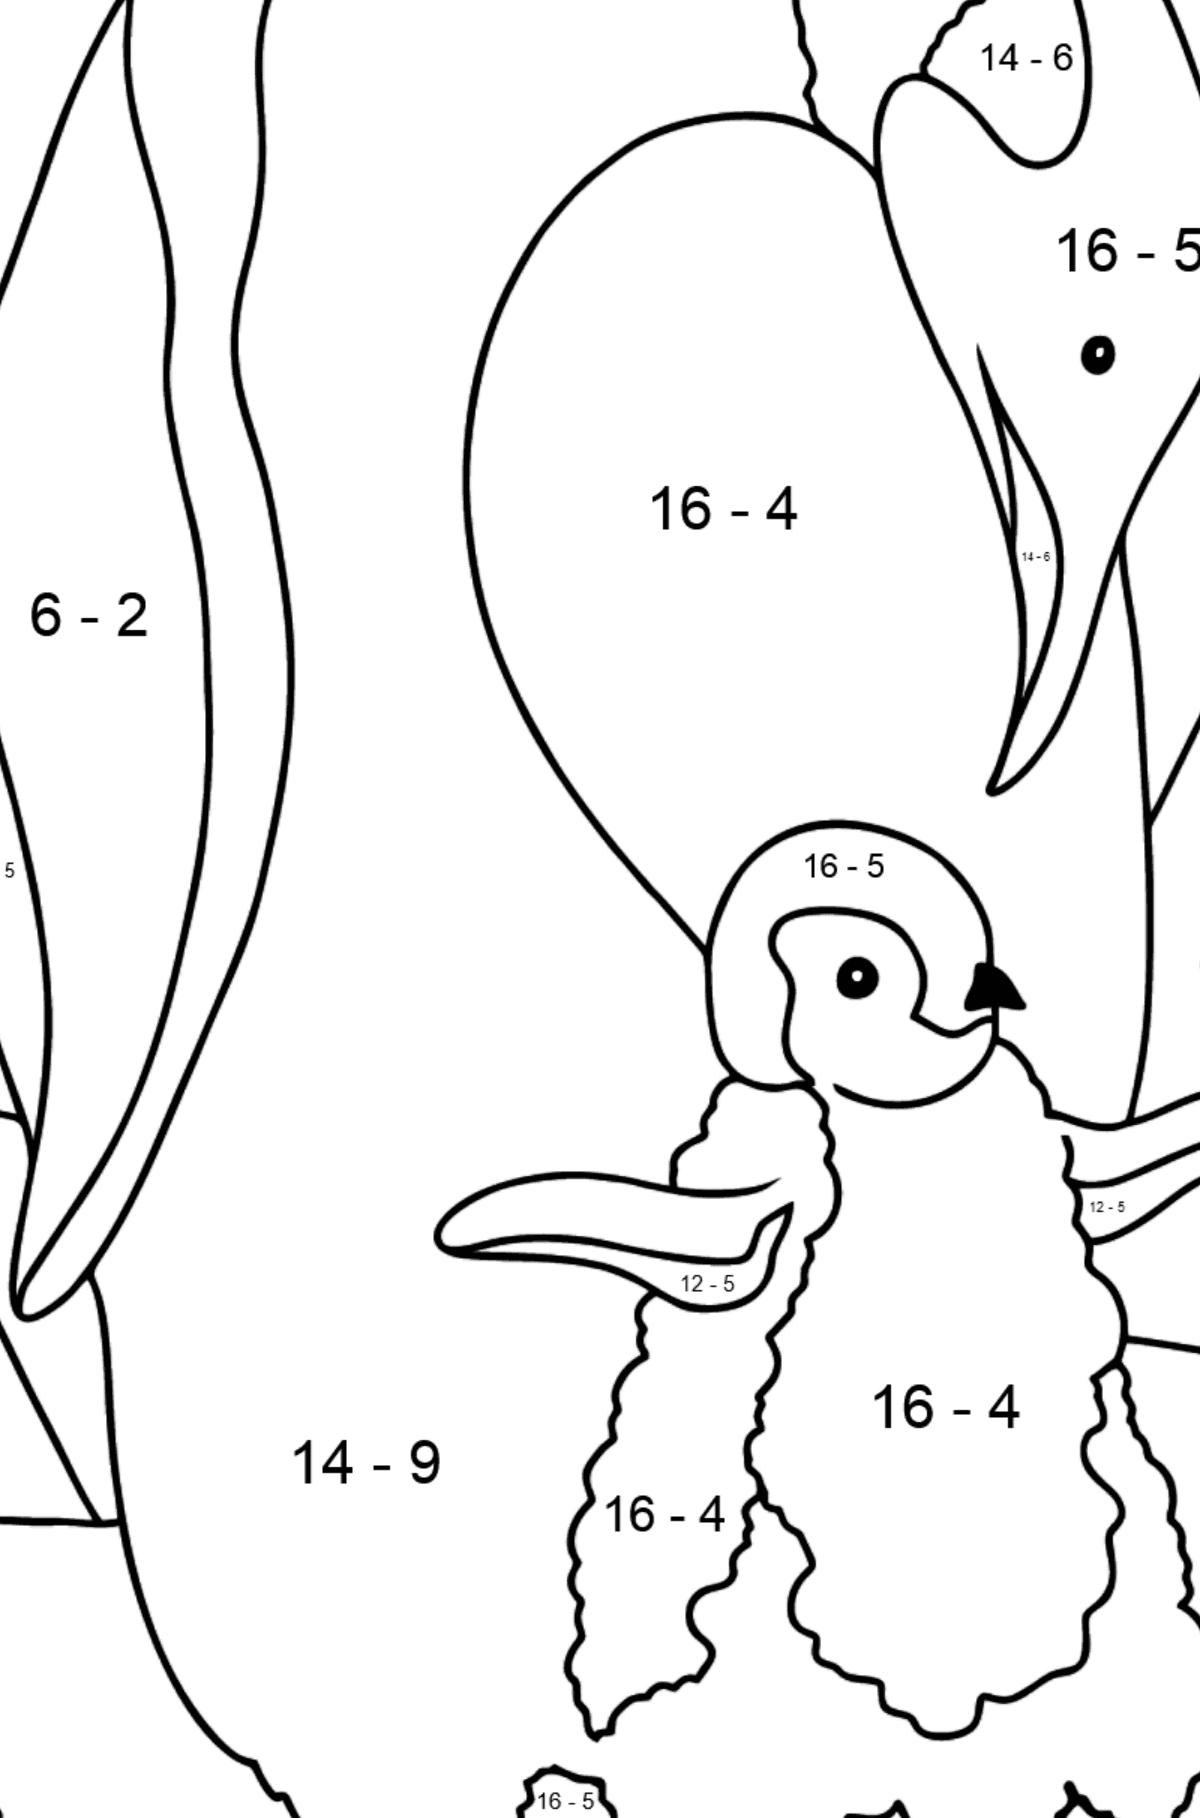 Coloring Page - A Penguin with a Baby - Math Coloring - Subtraction for Kids